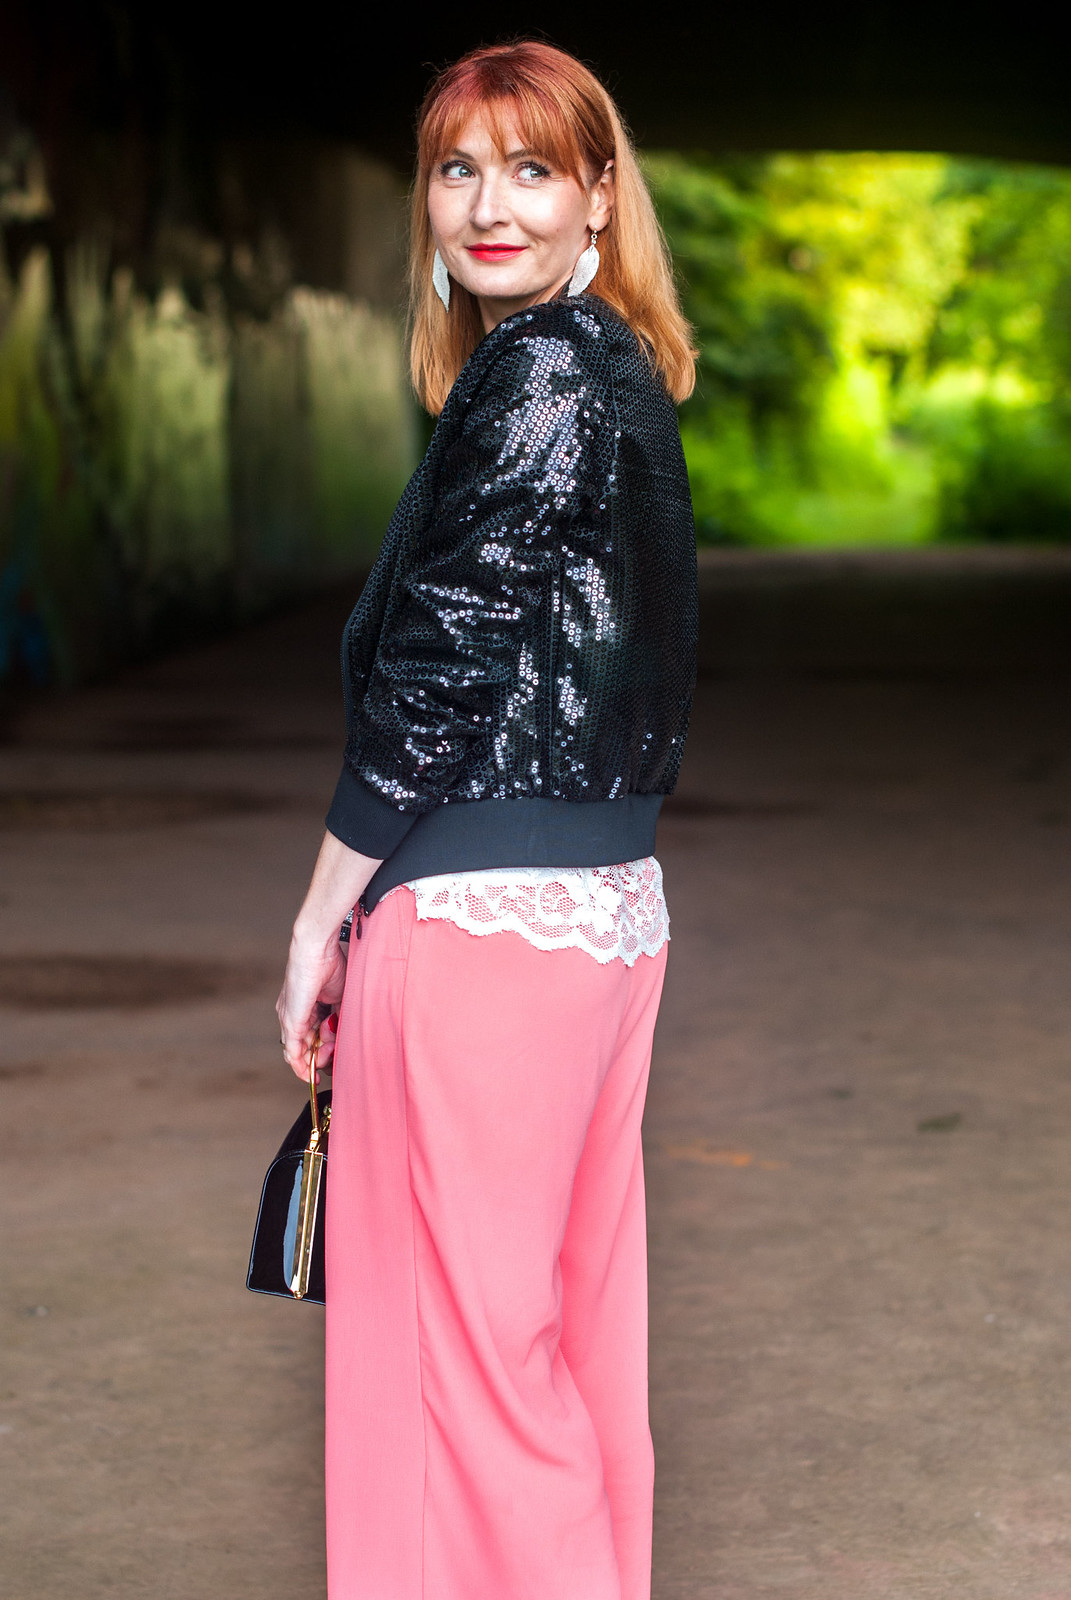 A day-to-night summer outfit: Sequin bomber jacket sporty lace top coral cropped trousers wide leg pants culottes rose gold espadrilles black crossover mules | Not Dressed As Lamb, over 40 style